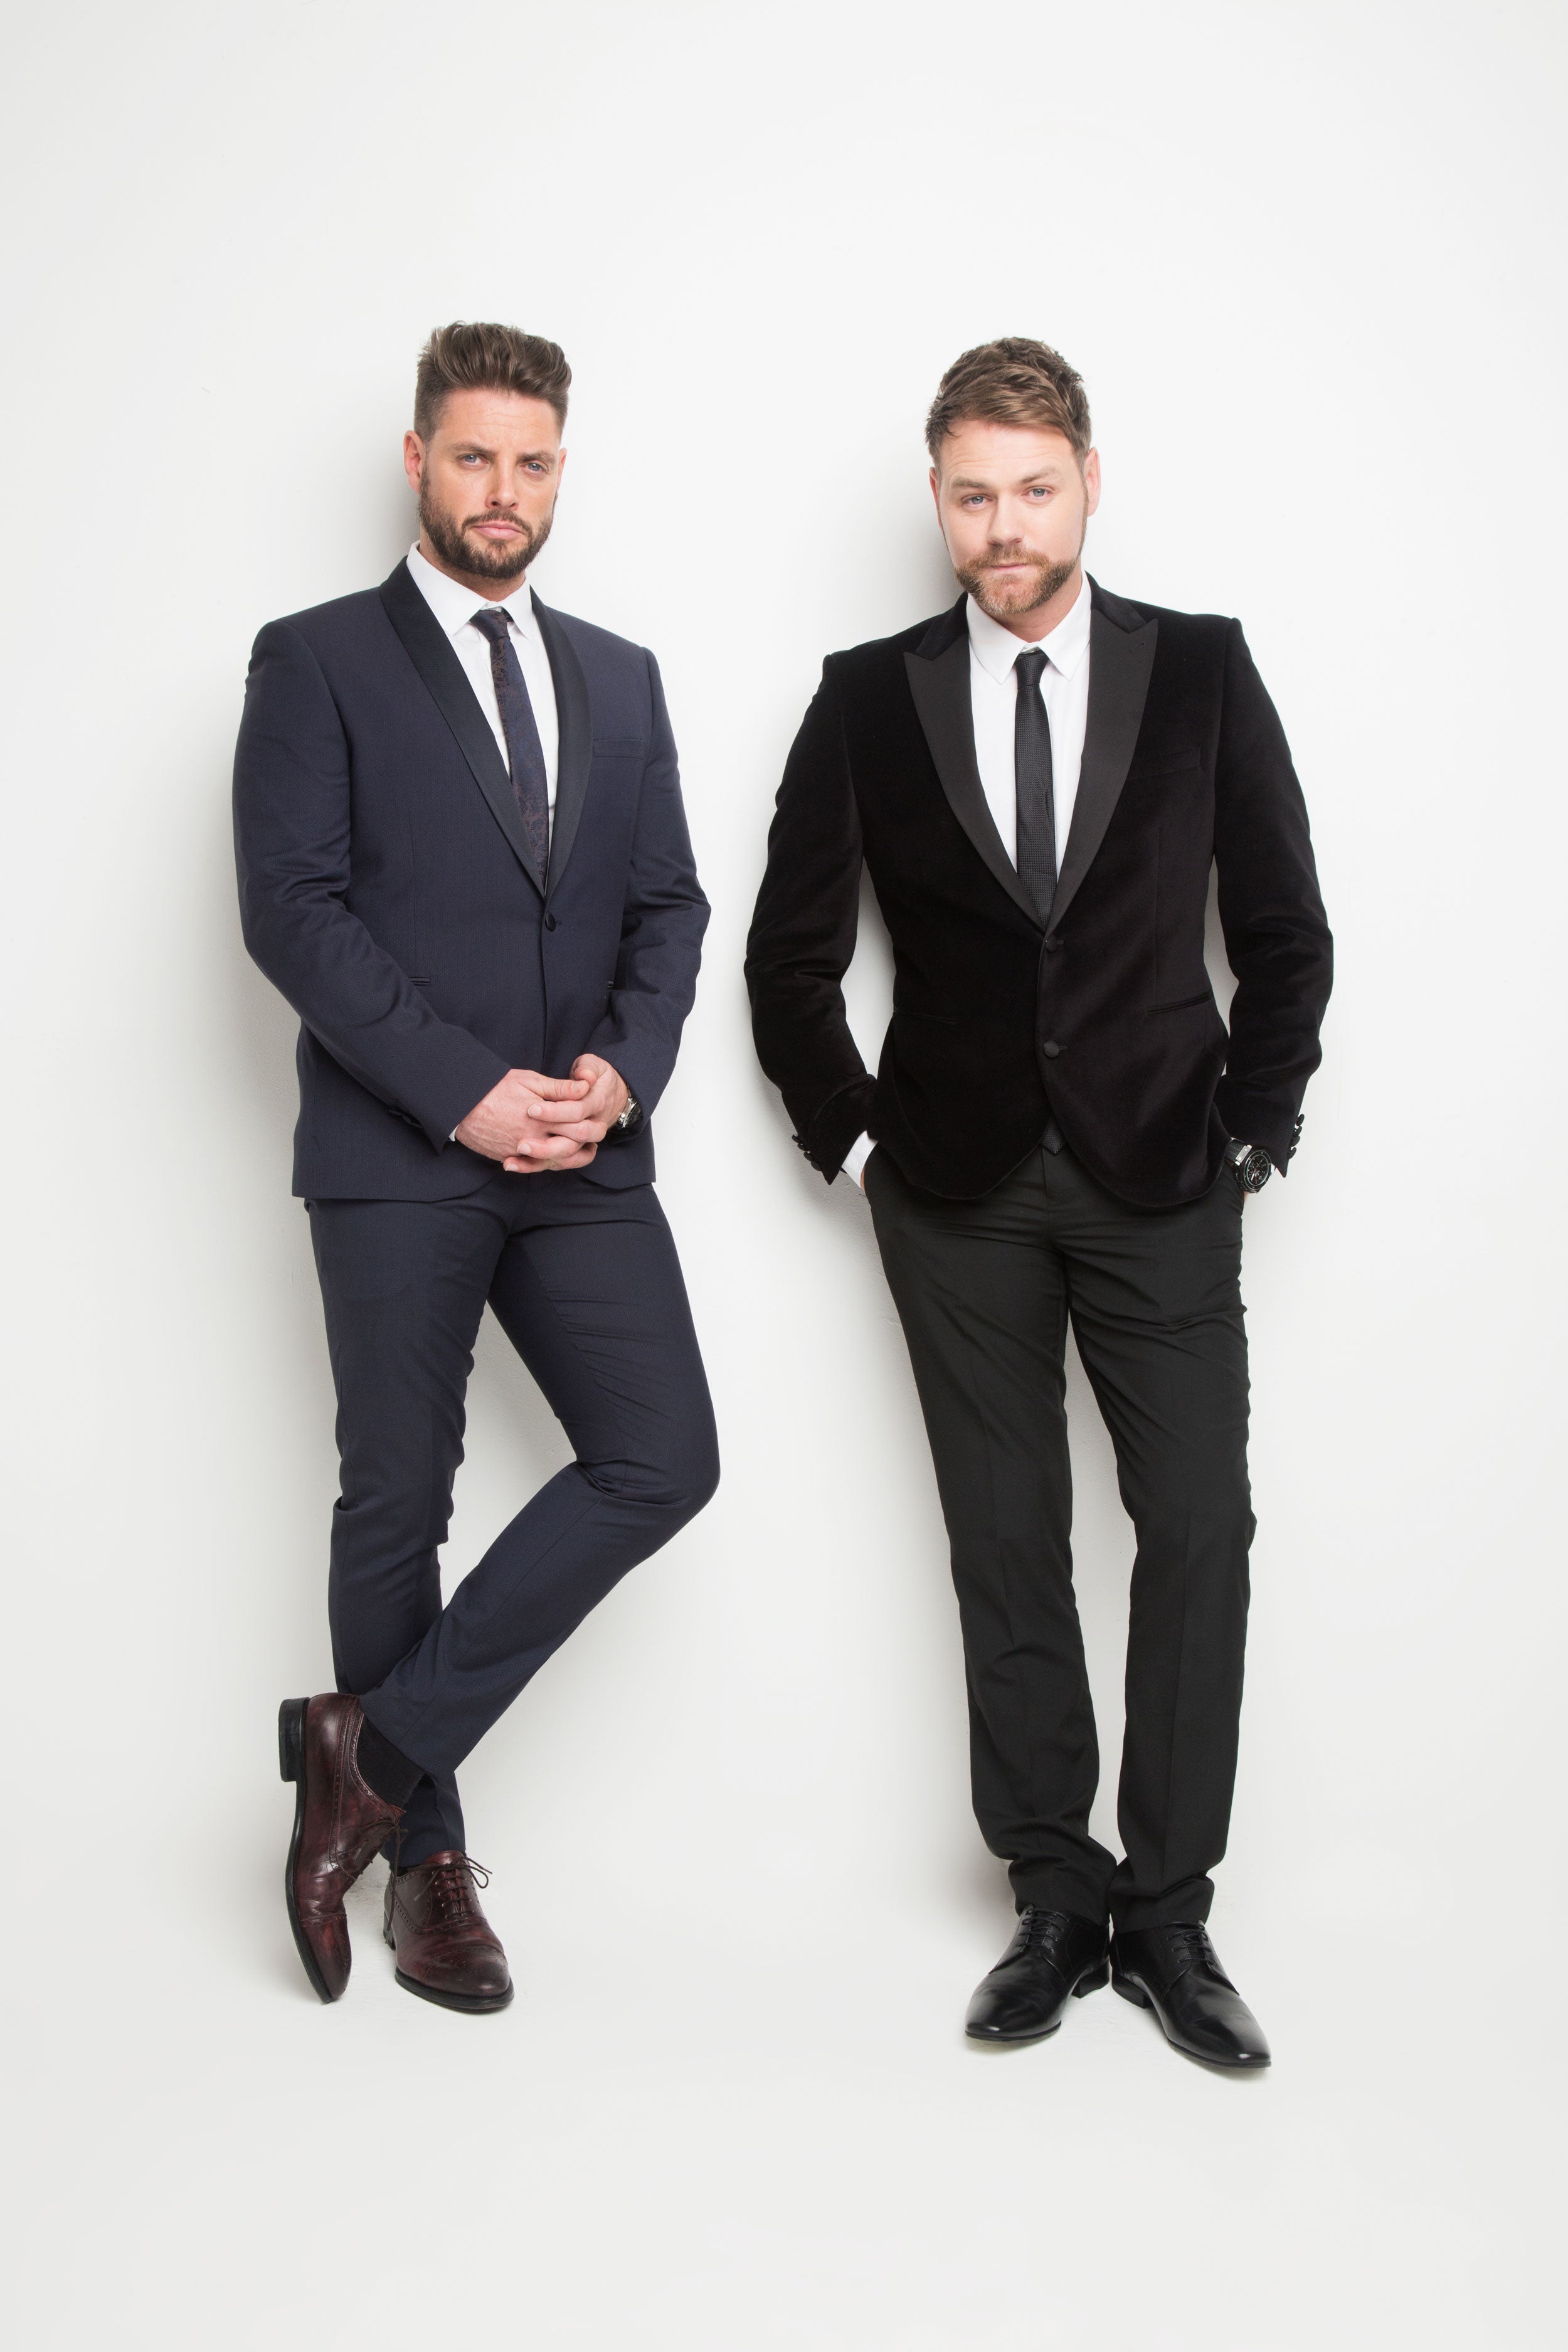 new presale password for Boyzlife Featuring Keith Duffy & Brian McFadden tickets in Bradford